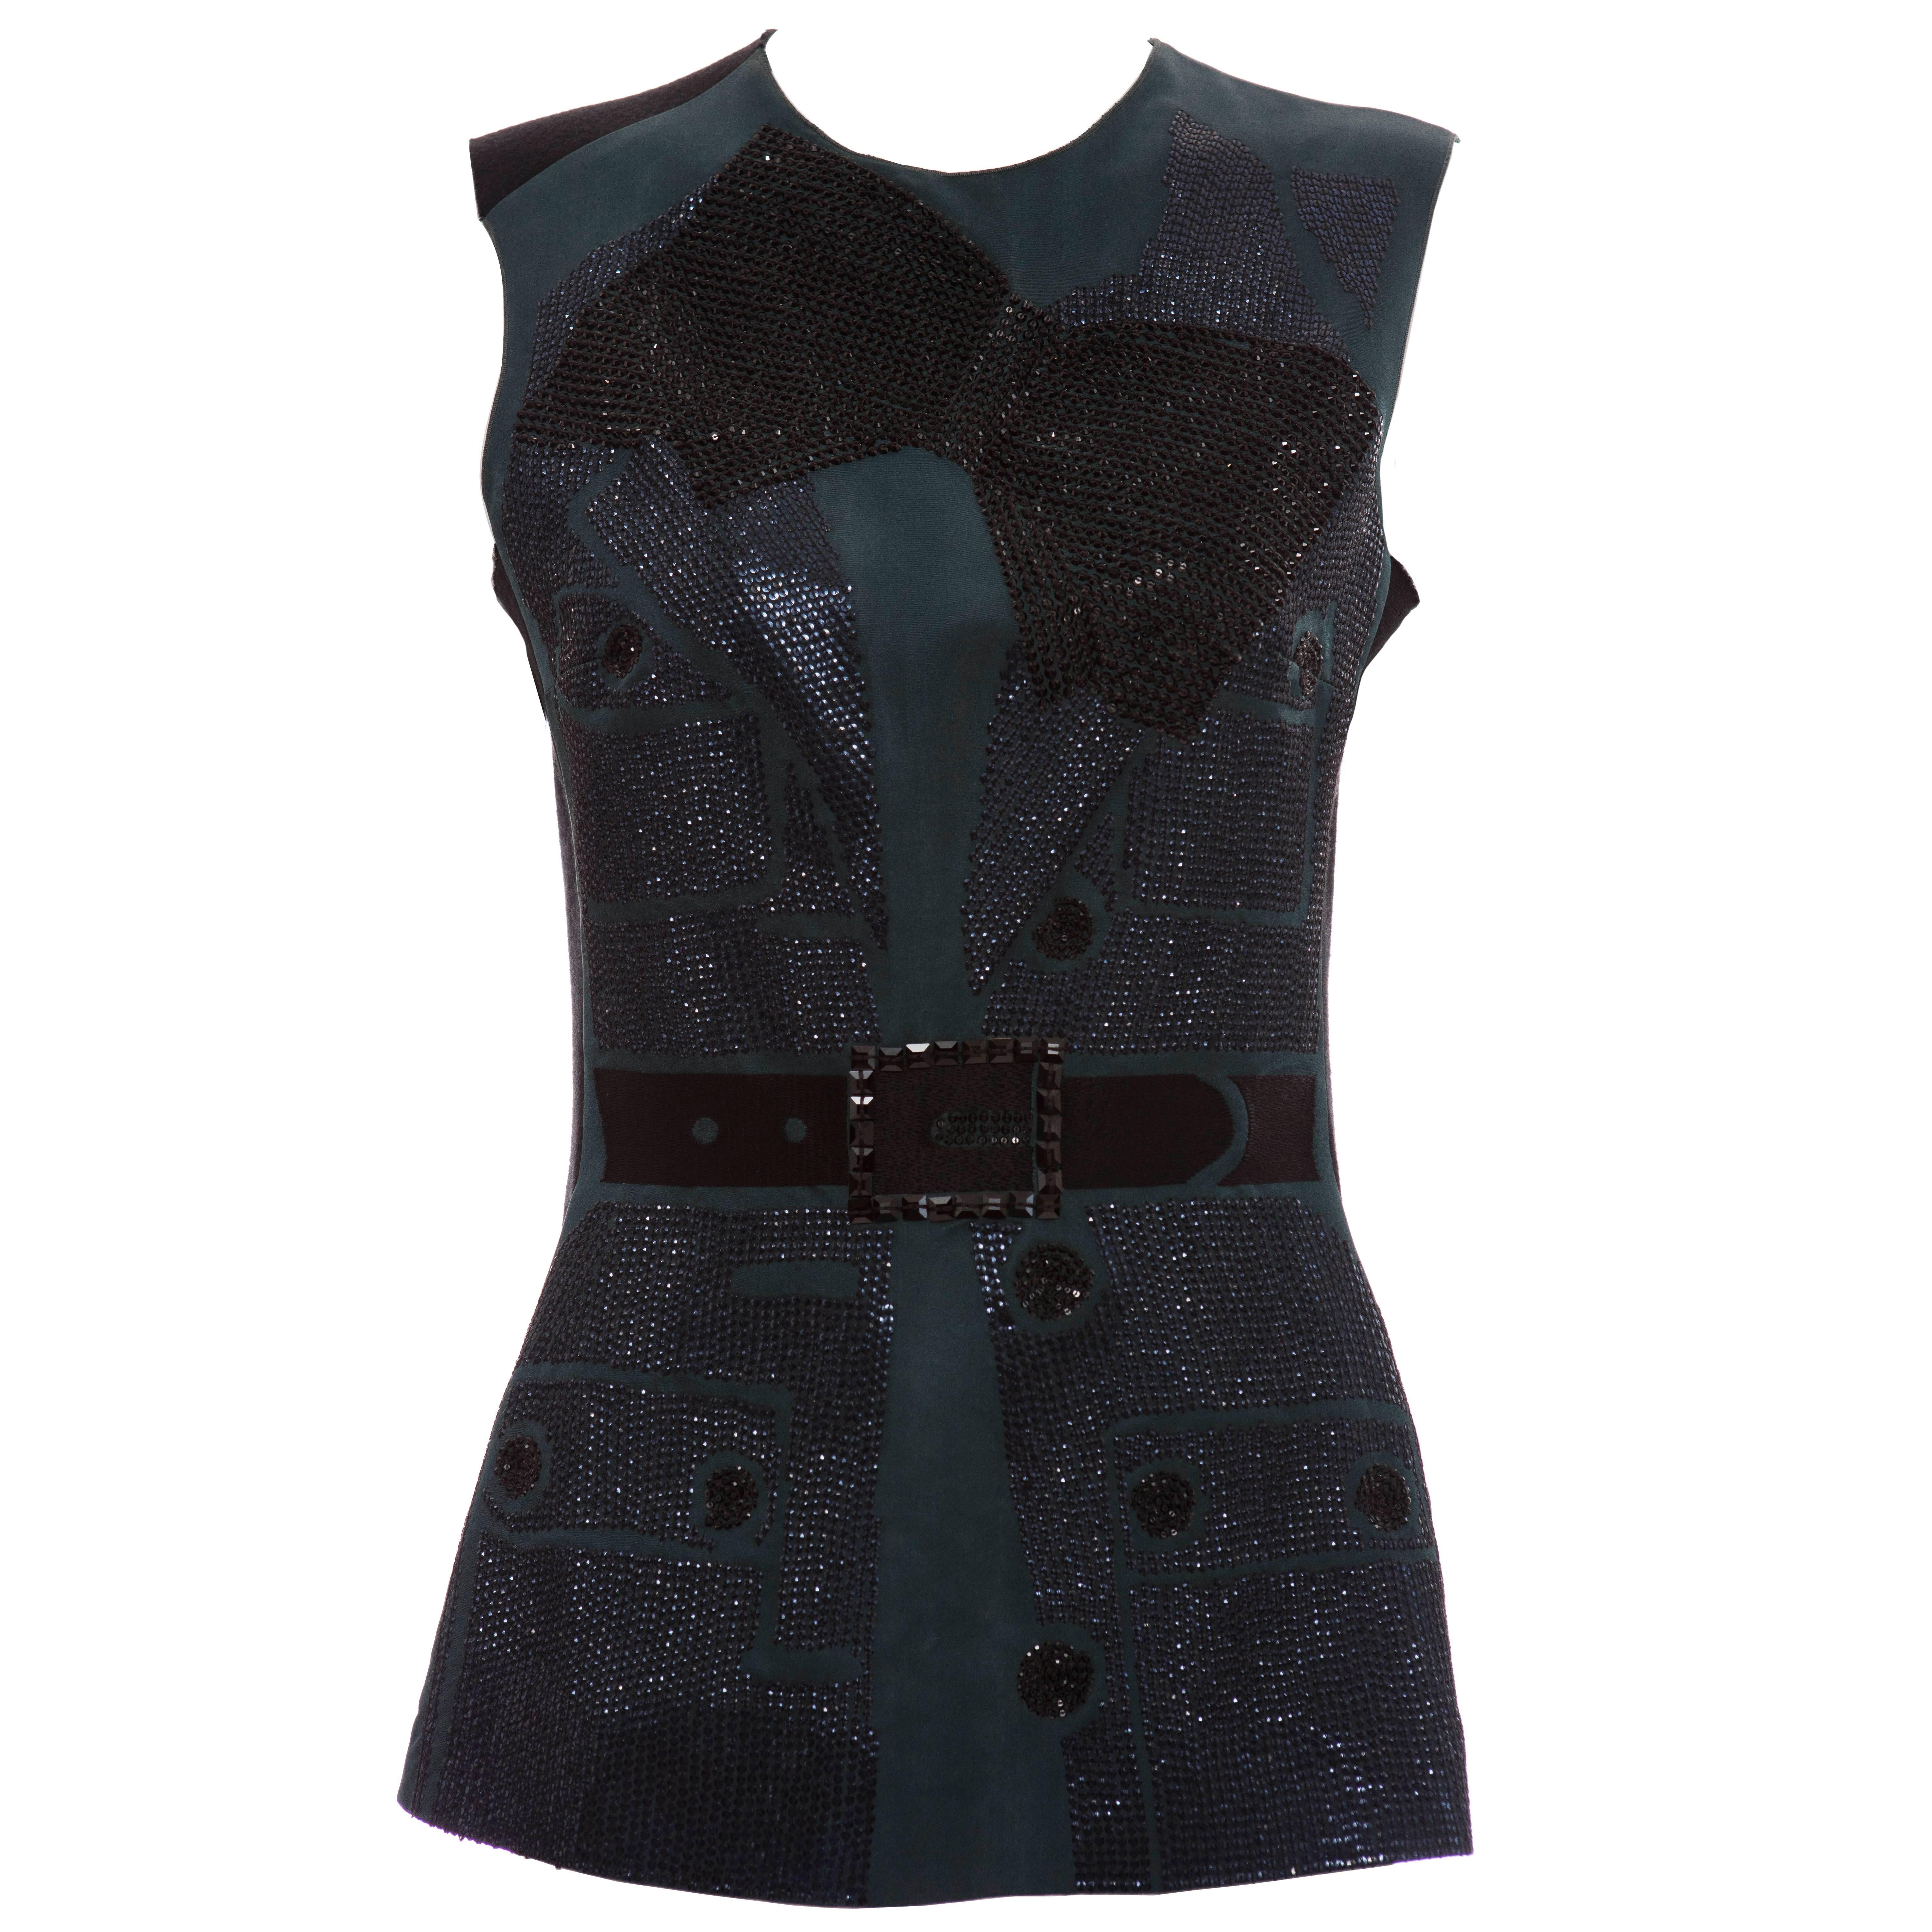 Lanvin By Alber Elbaz Sleeveless Trompe l'oeil  Silk Embellished Top Circa 2006 For Sale